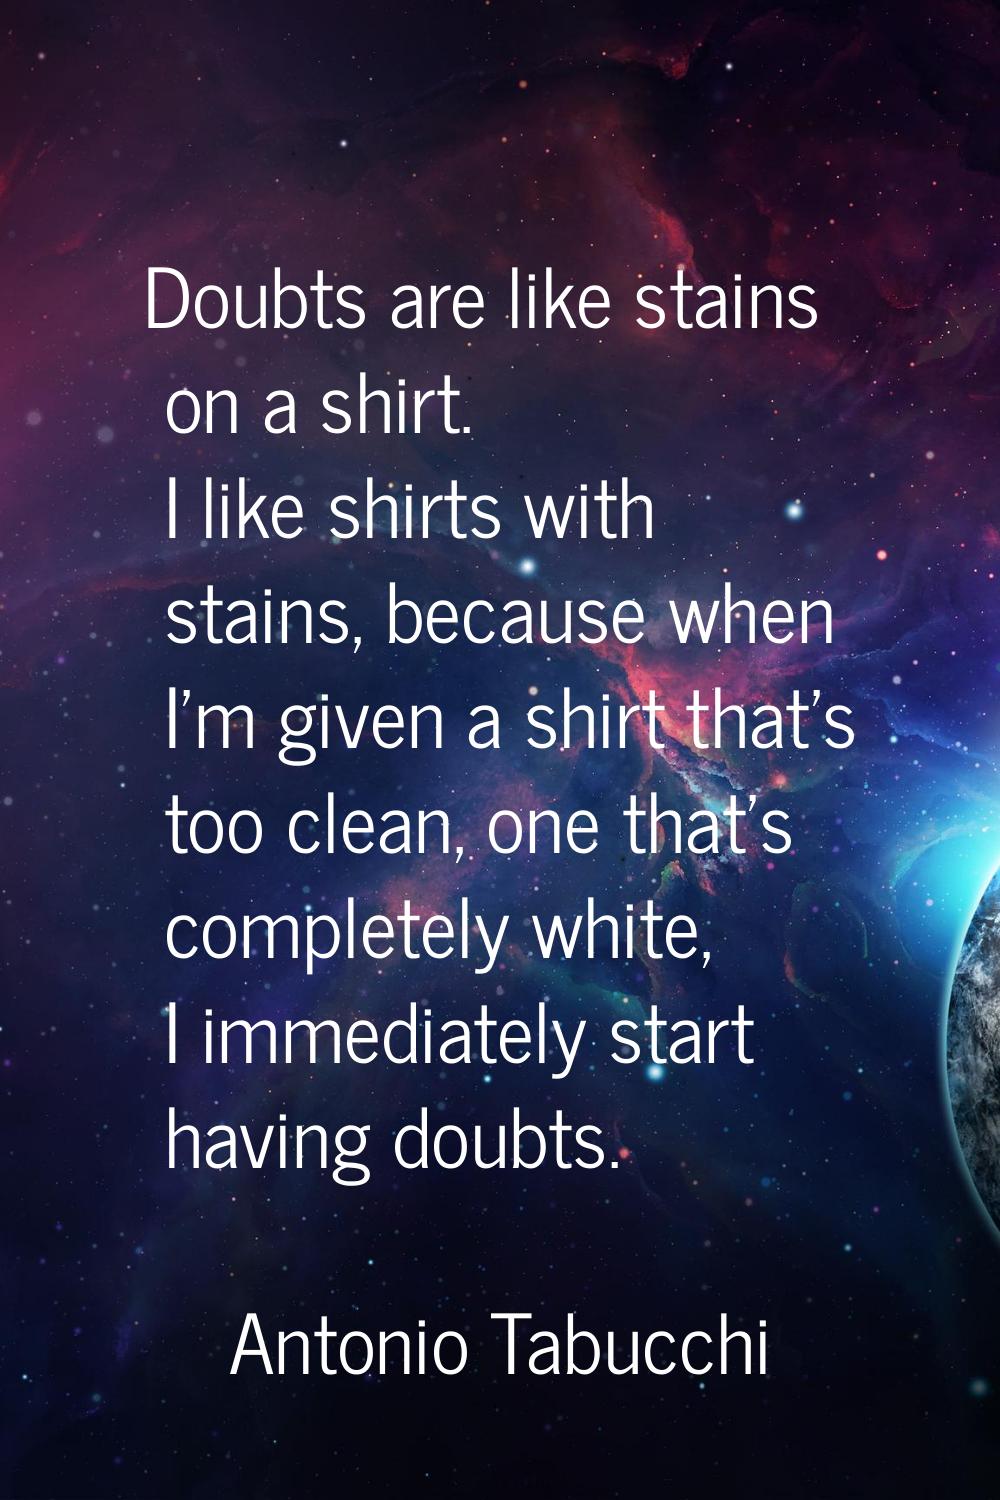 Doubts are like stains on a shirt. I like shirts with stains, because when I'm given a shirt that's